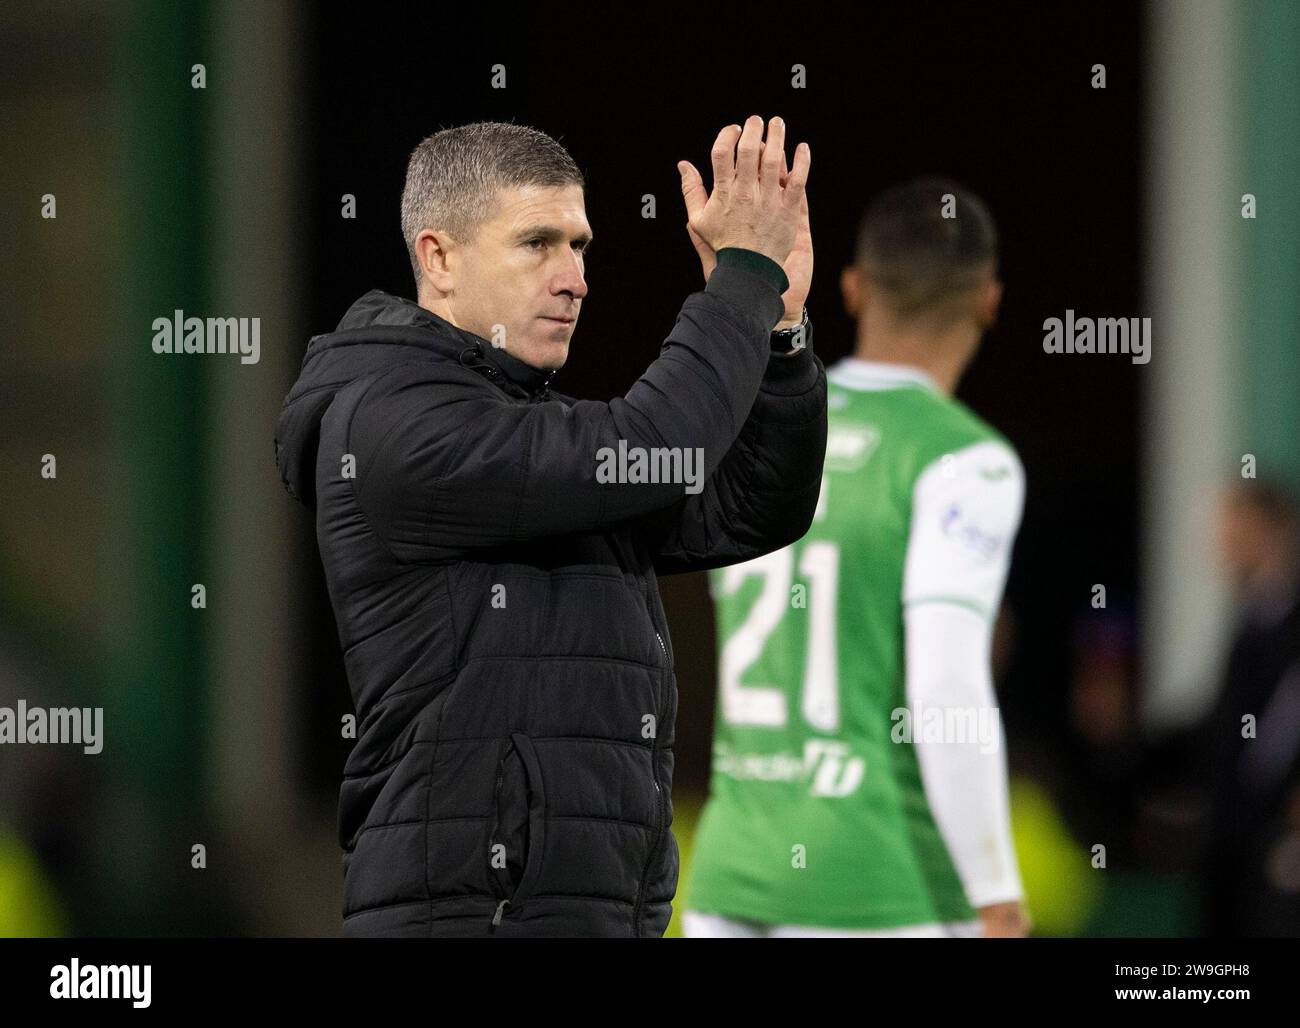 Edinburgh, UK. 27th Dec, 2023. Scottish Premiership - Hibernian FC v Heart of Midlothian FC 27/12/2023 Hibs' Head Coach, Nick Montgomery, salutes the crowd at the end of the match which finished 1-0 to the visitors as Hibernian took on Heart of Midlothian in the Scottish Premiership at Easter Road Stadium, Edinburgh, UK Credit: Ian Jacobs/Alamy Live News Stock Photo